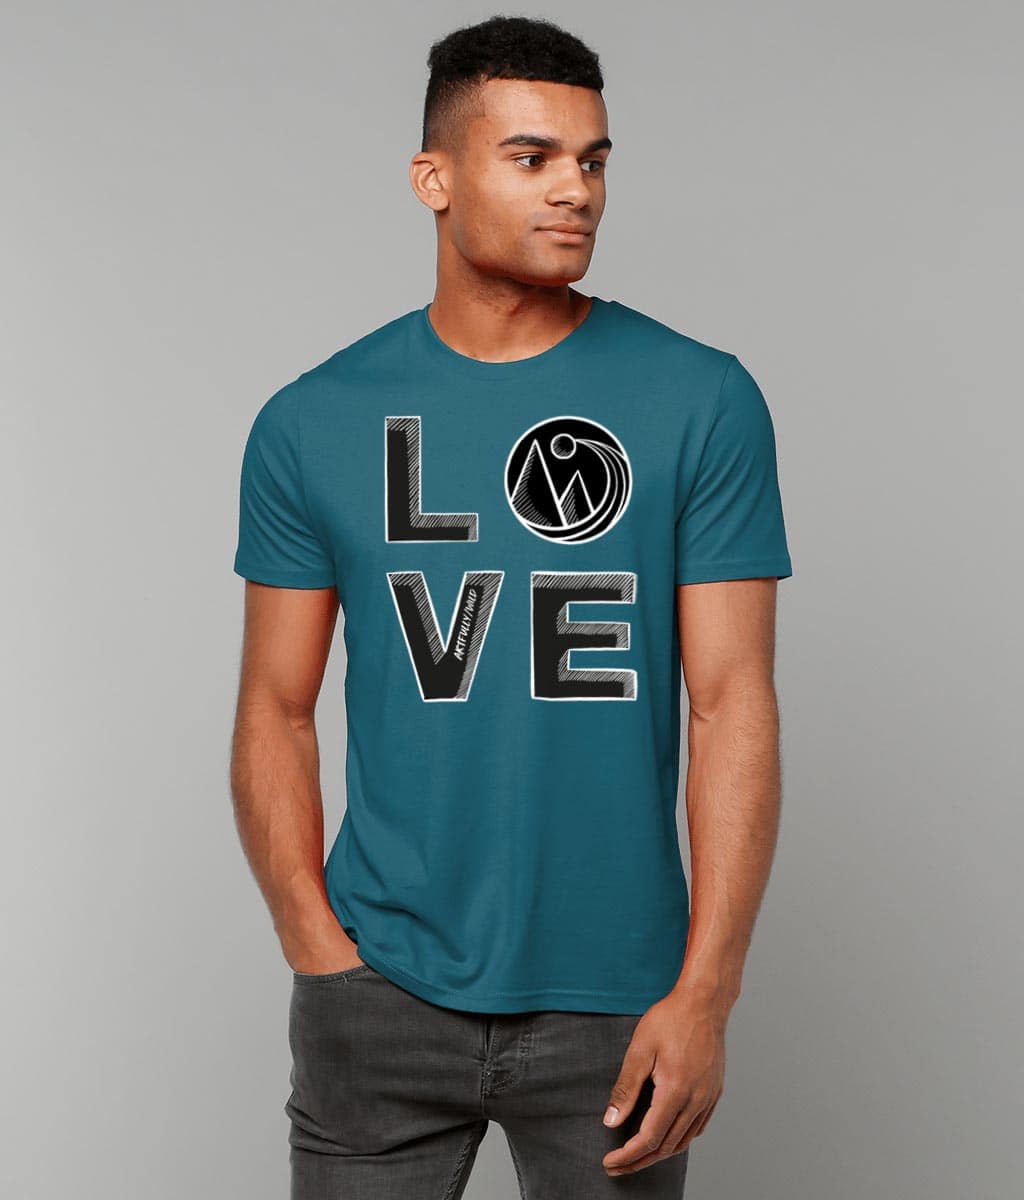 Man wearing 'LOVE' Print on Ocean Blue Organic T-Shirt. Unisex/Women/Men. Sustainable Clothing. Original Sketched Illustration by Artfully/Wild. Printed with water-based inks.